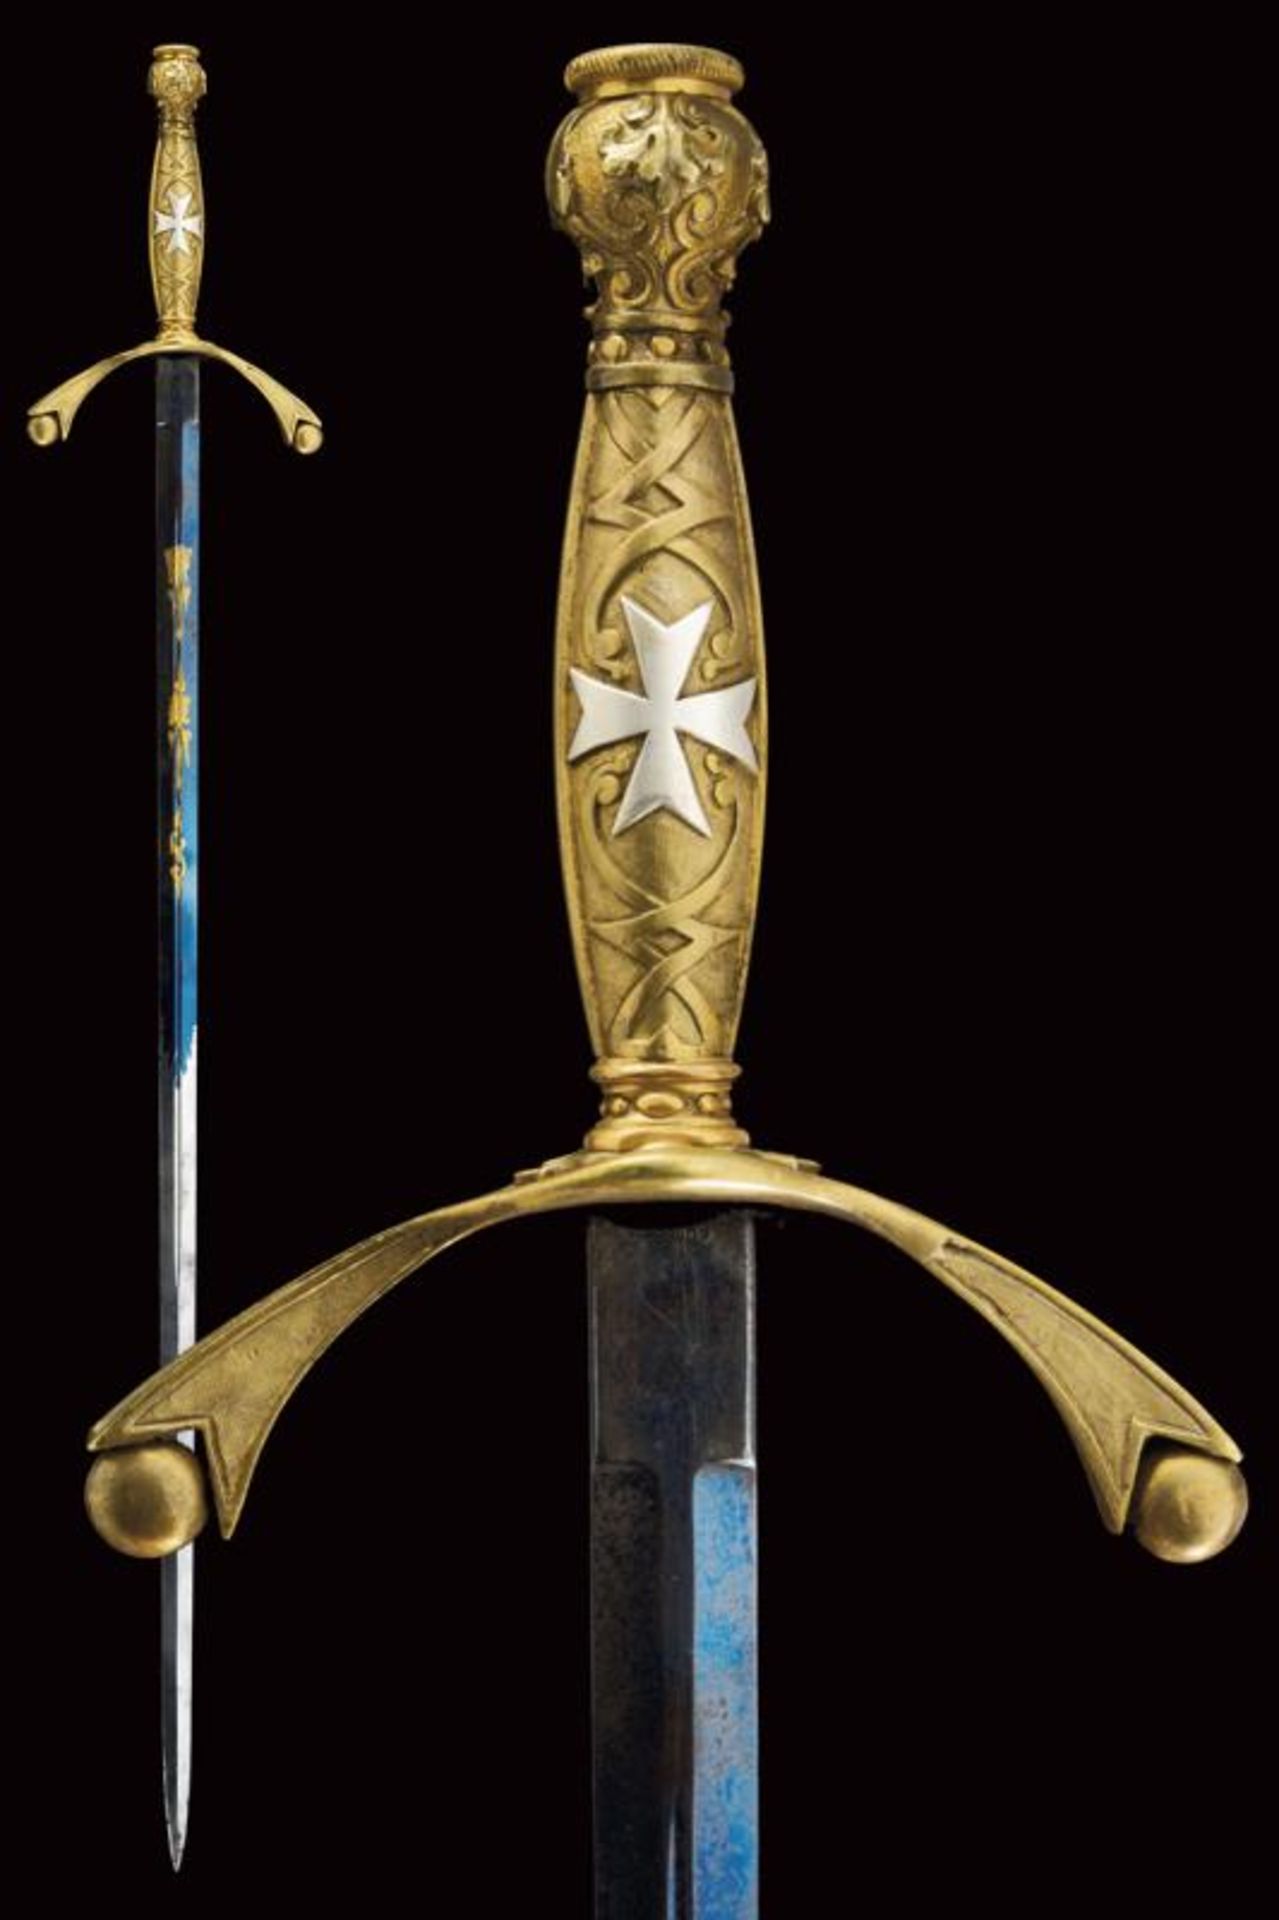 A small sword with the Maltese Cross